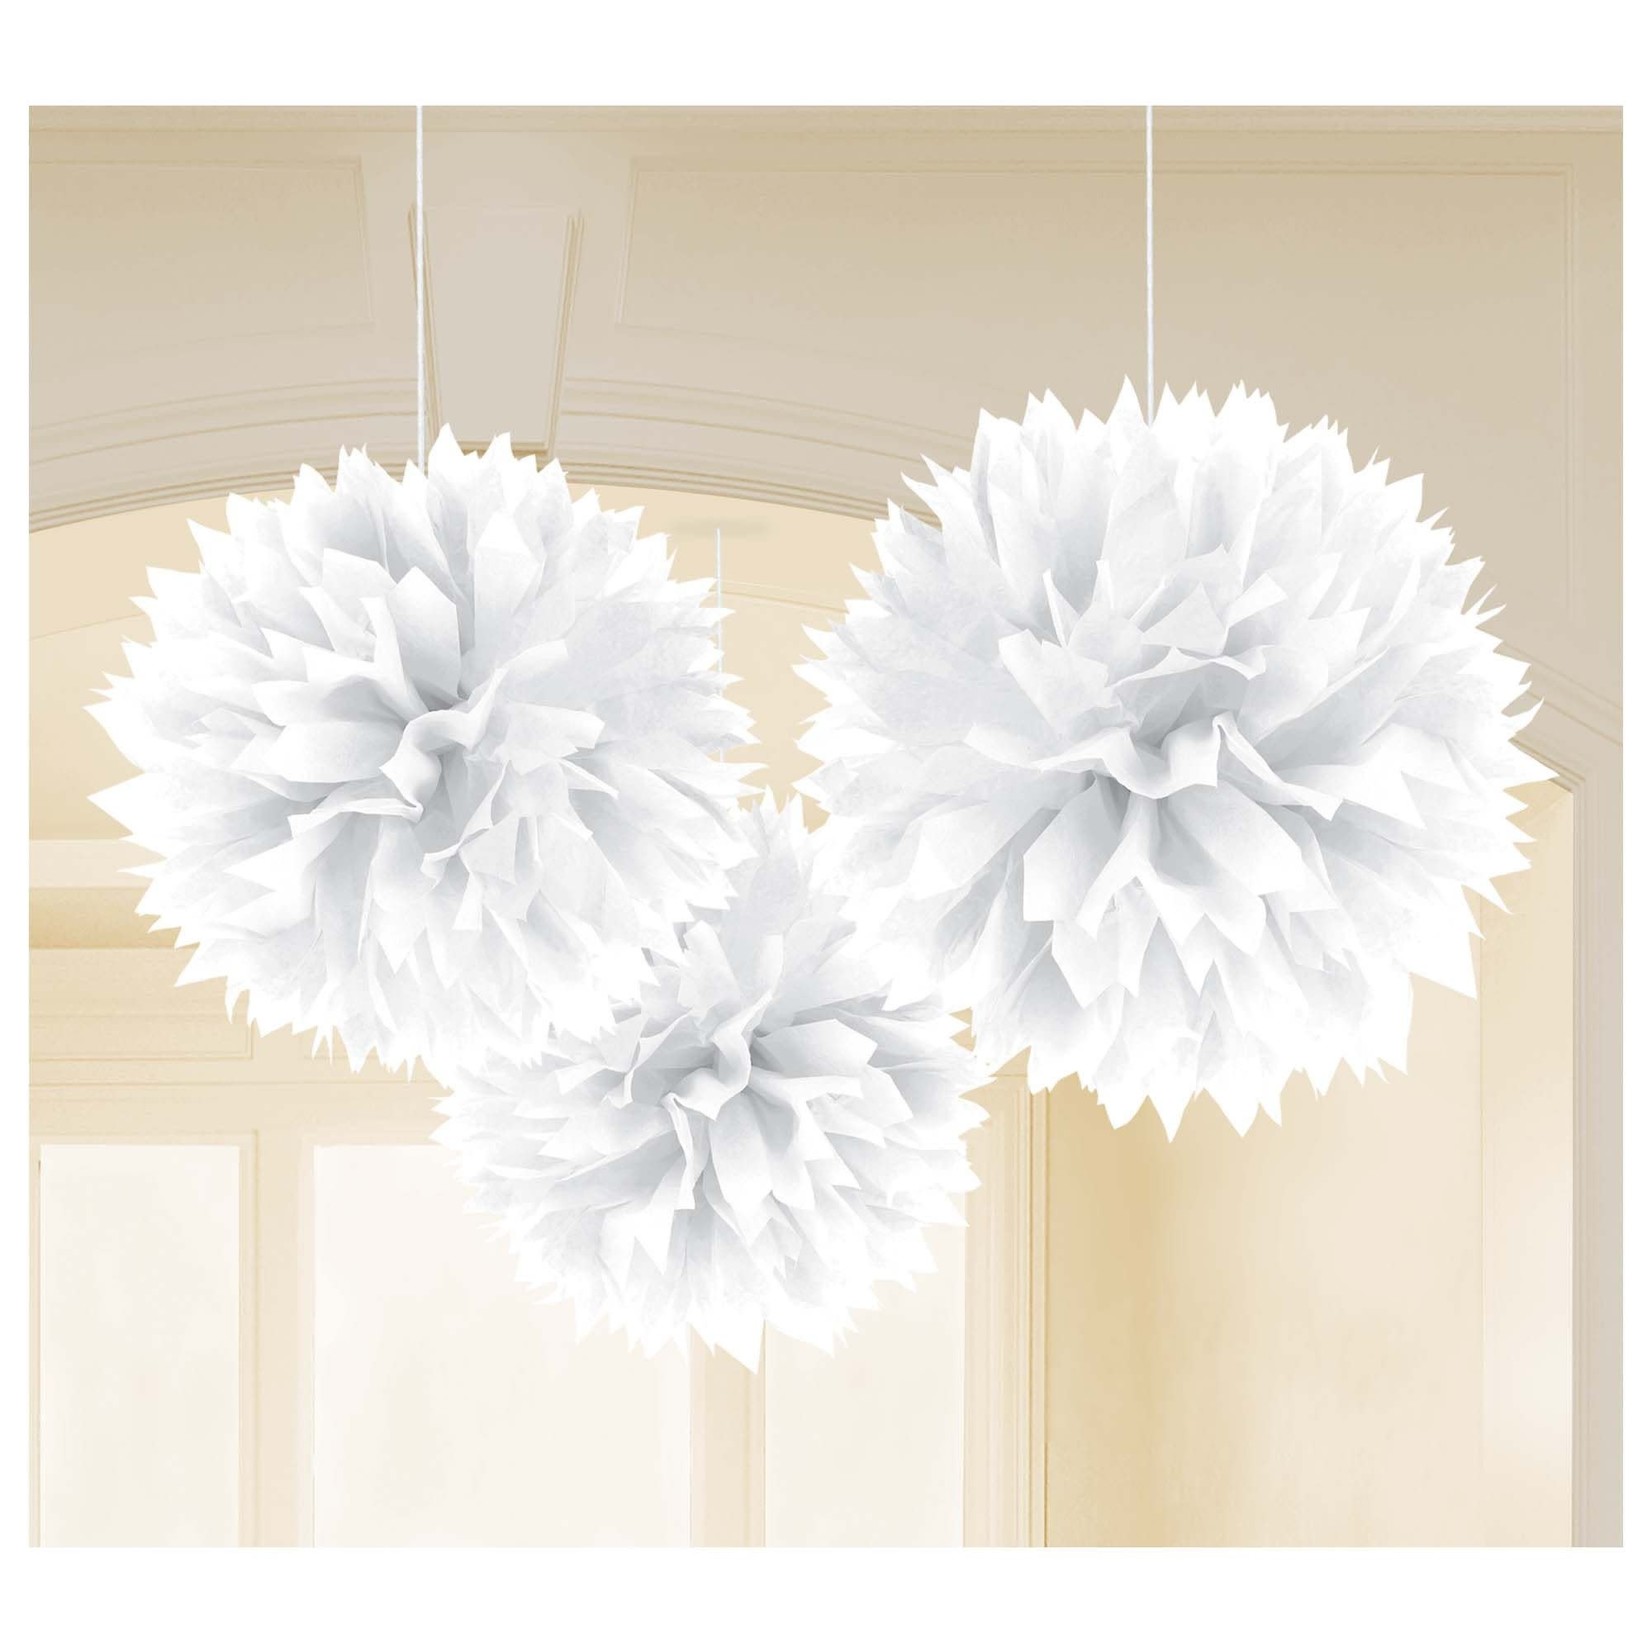 Frosty White Fluffy Paper Decorations